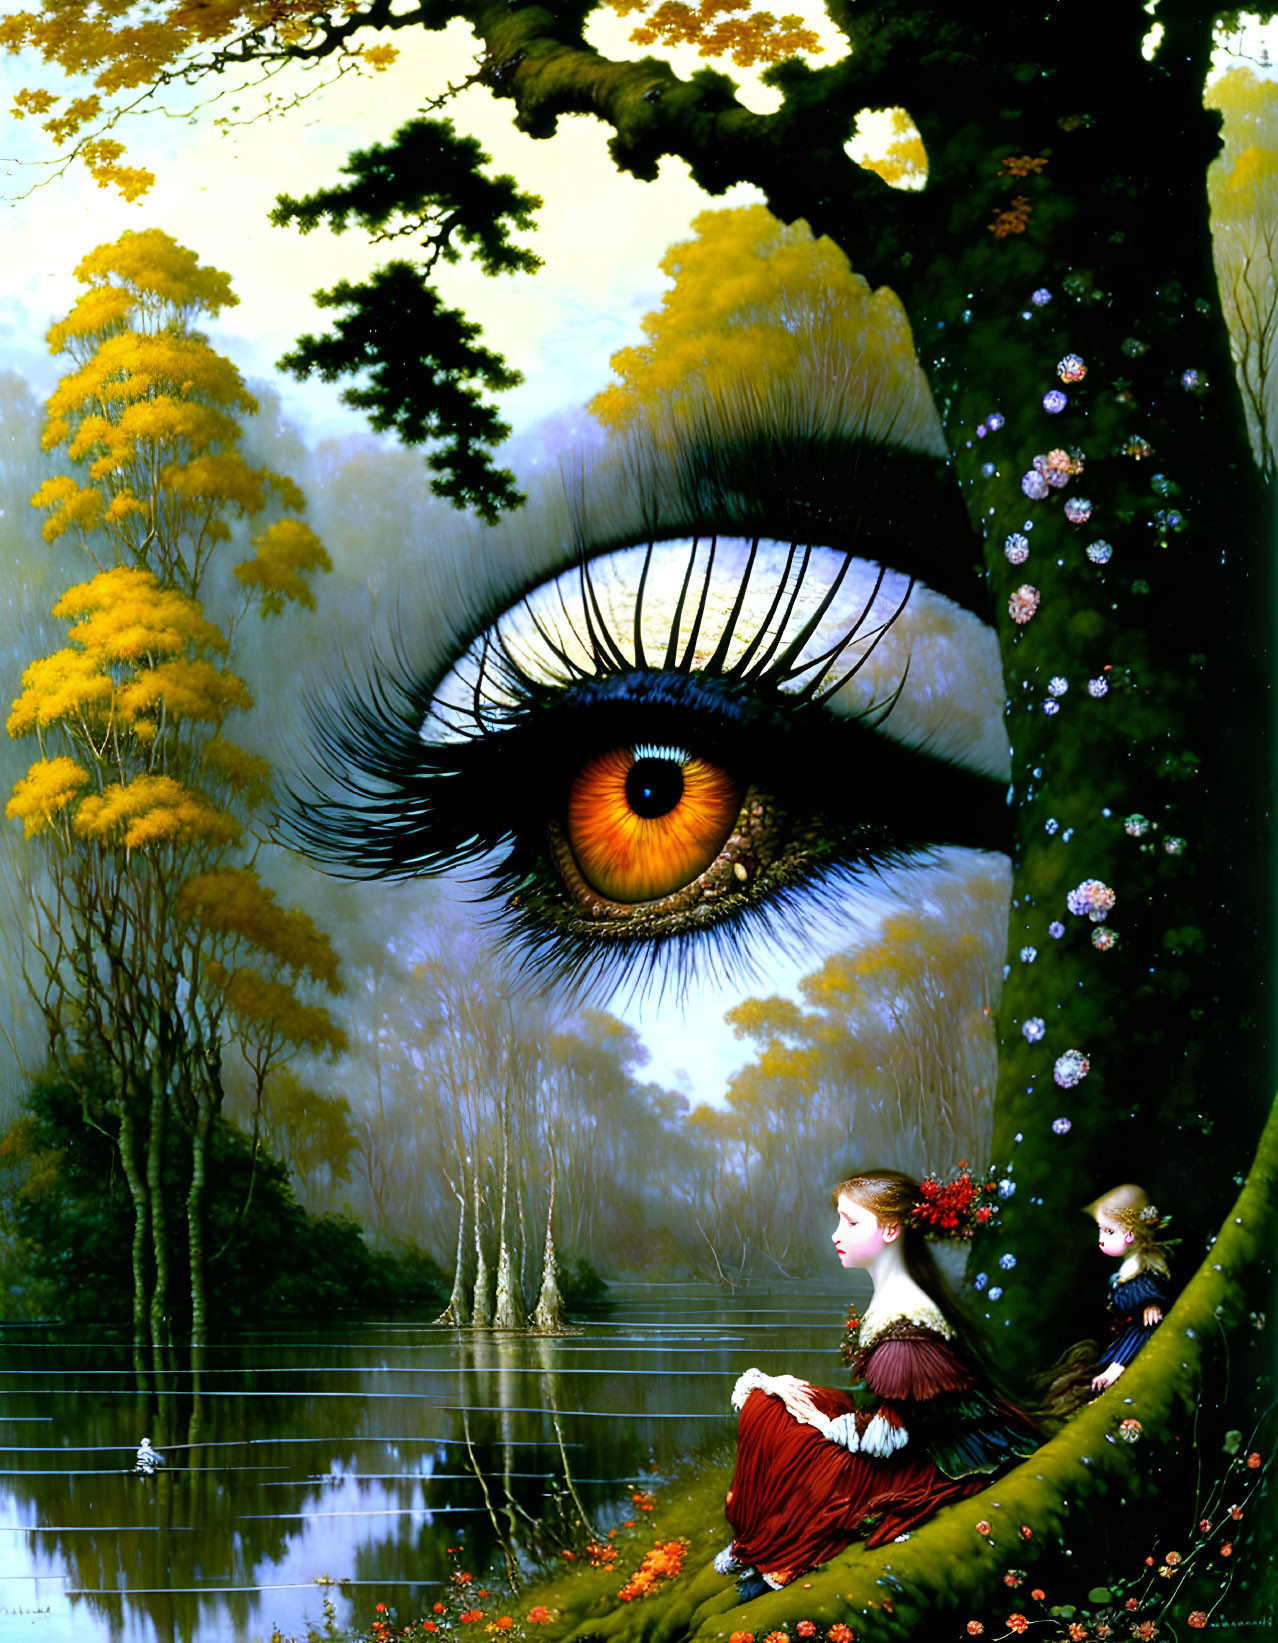 Surreal image: oversized human eye in forest with small figures by water